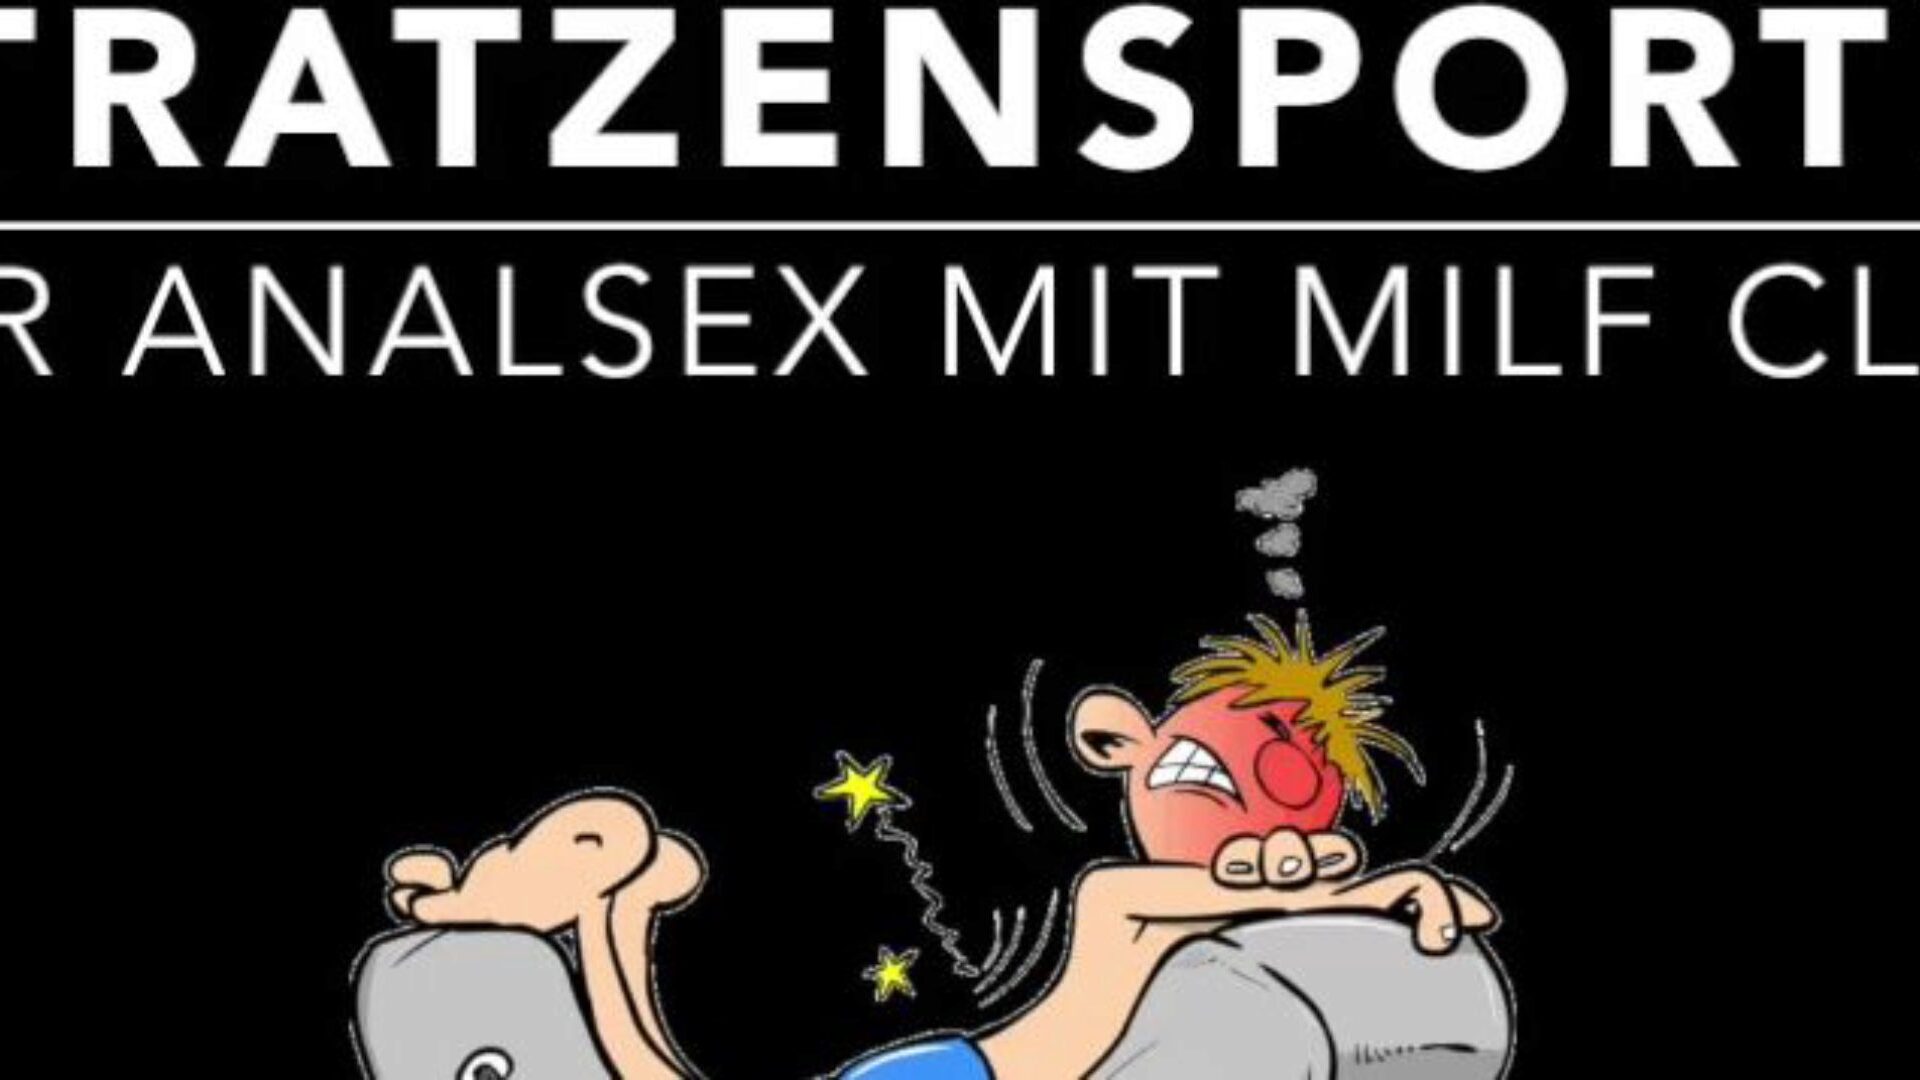 matratzensportler - harter analsex mit milf claudia ... شاهد matratzensportler - harter analsex mit mother I would like to fuck claudia movie on xhamster - The Ultimate Bevy of free-for-all german new milf tube hd porn tube movie scenes